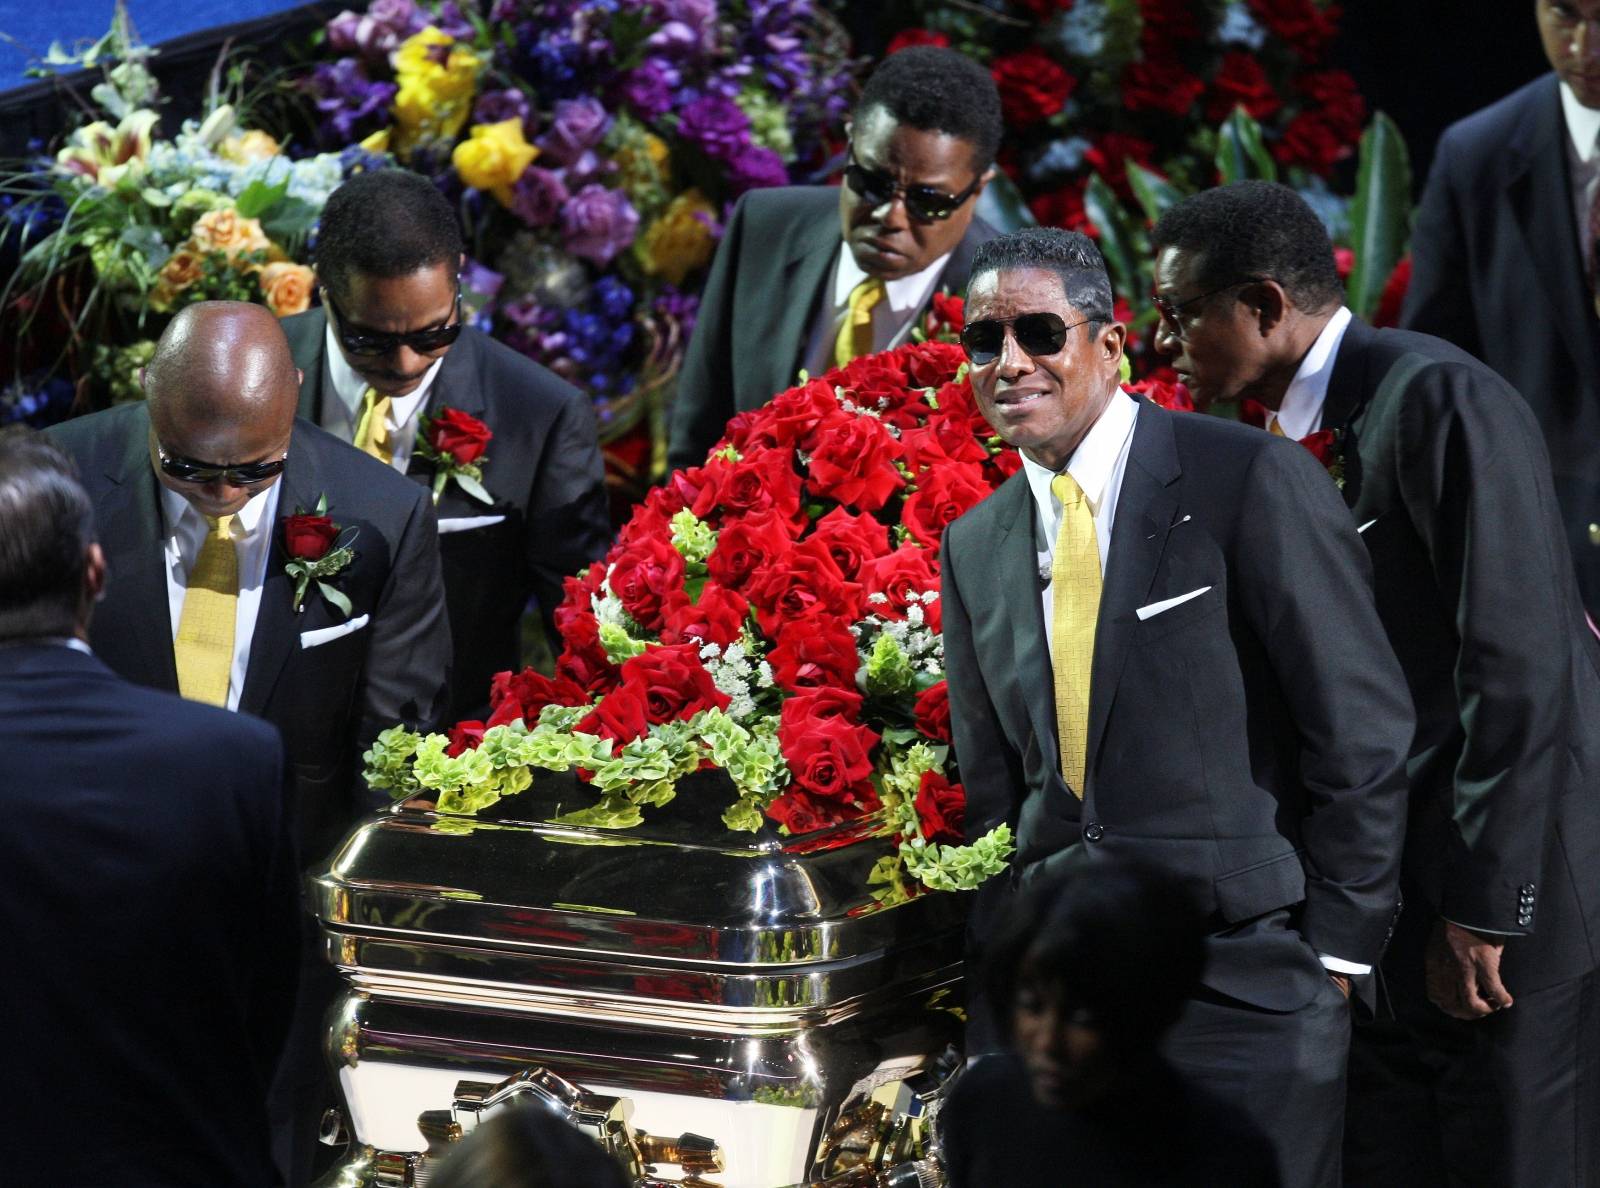 FILE PHOTO: Michael Jackson's brothers (L-R) Randy, Marlon, Tito, Jermaine, and Jackie carry his casket out of the Staples Center following memorial services for pop star Michael Jackson in Los Angeles